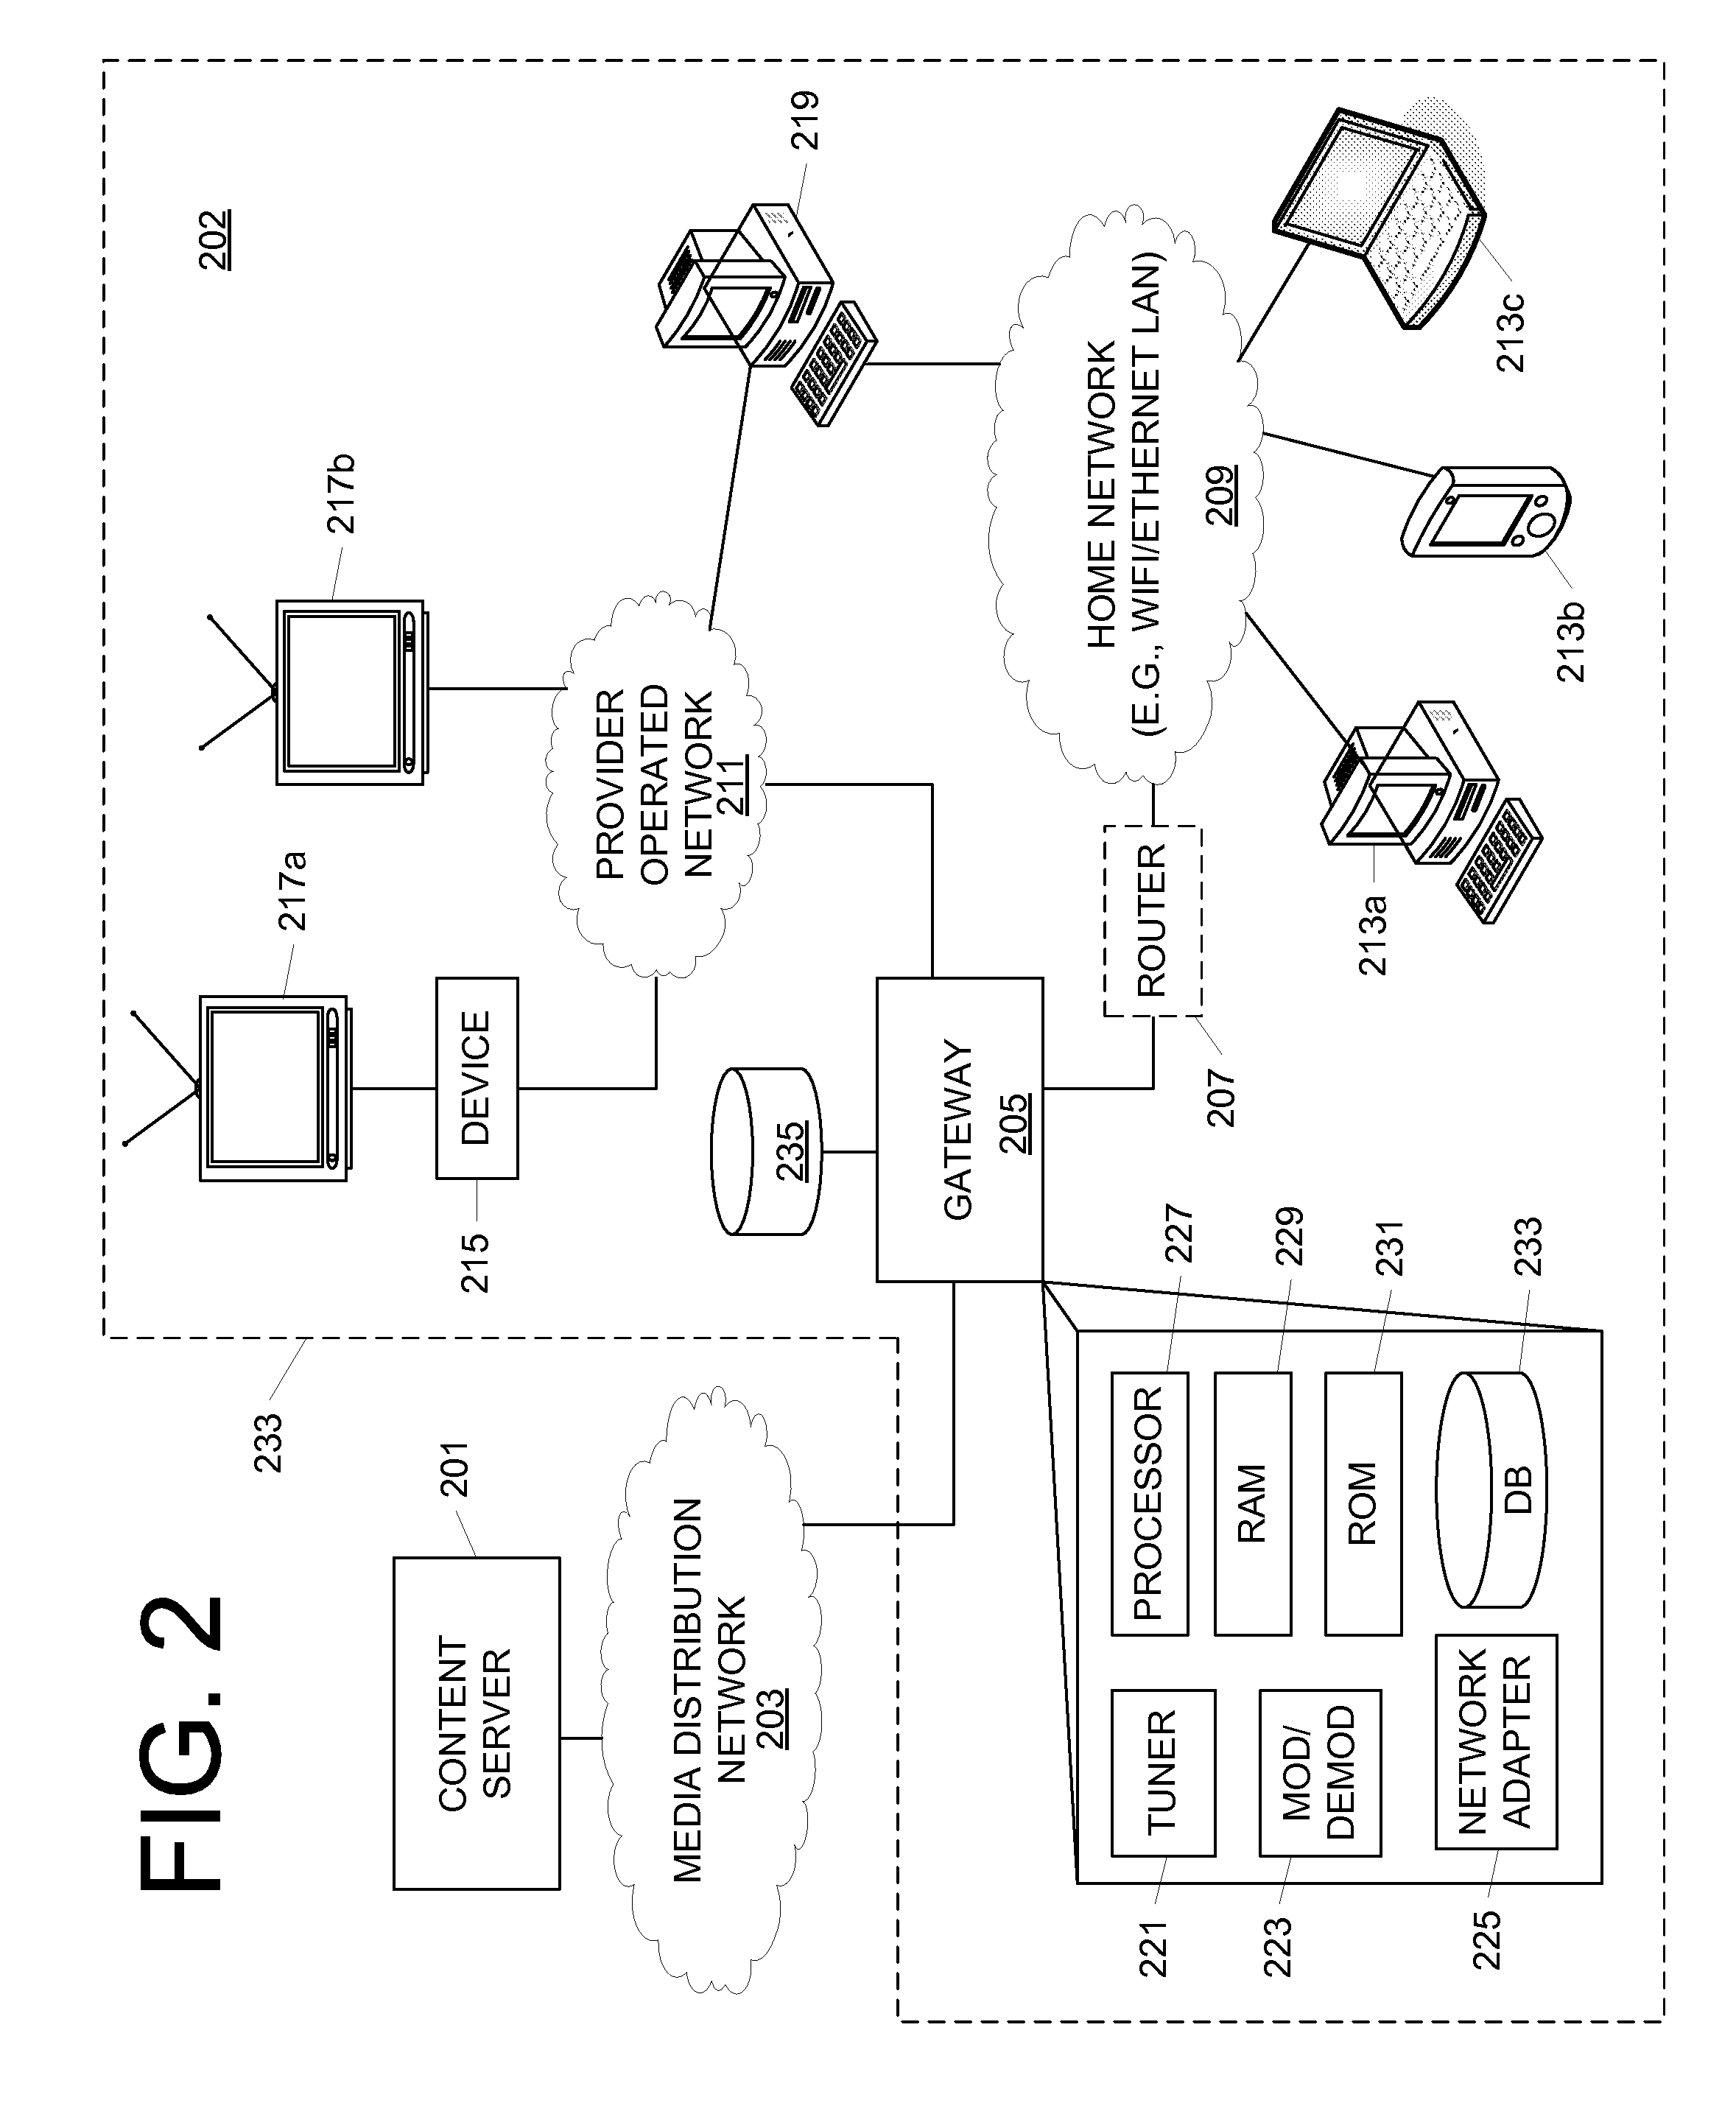 Quality of Service for Distribution of Content to Network Devices